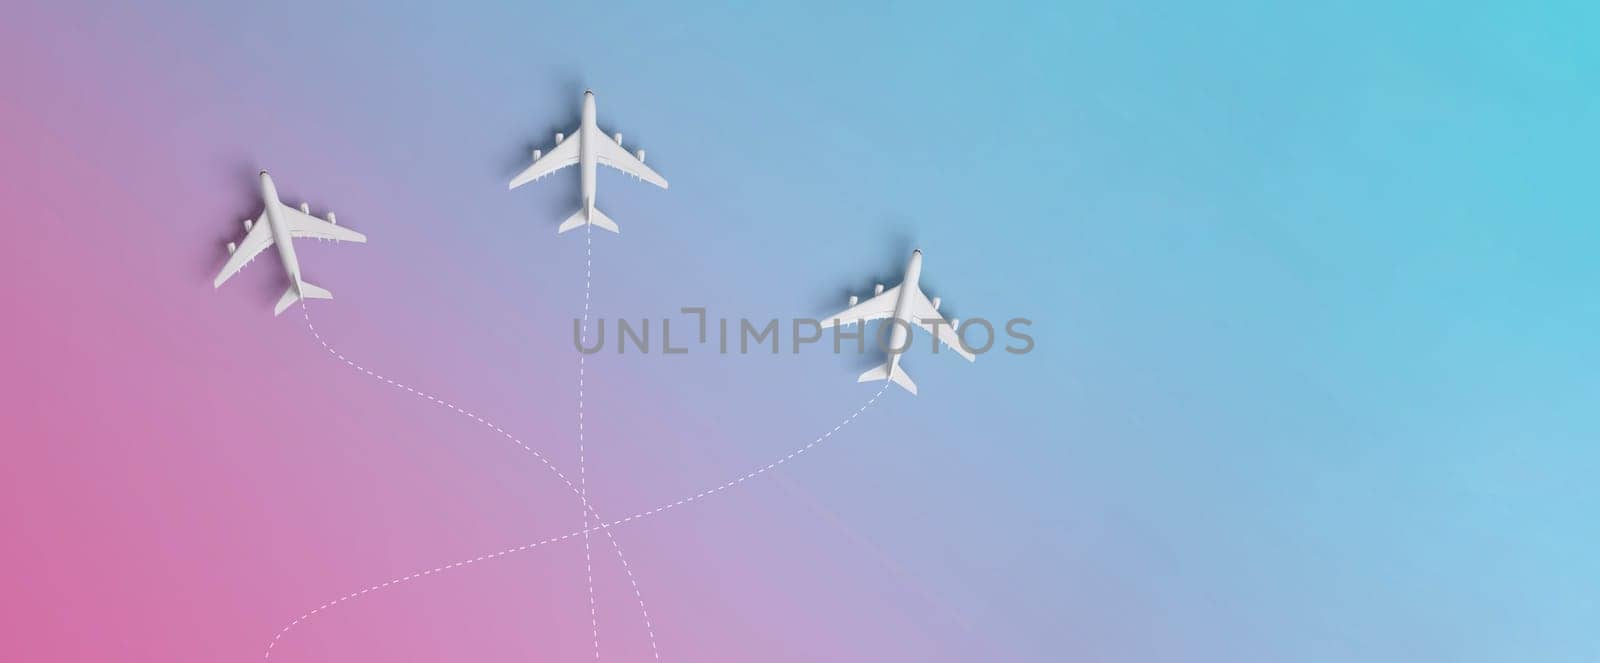 three airplanes travelling to different destinations in gradient background. holiday or business trip concept. by ImagesRouges